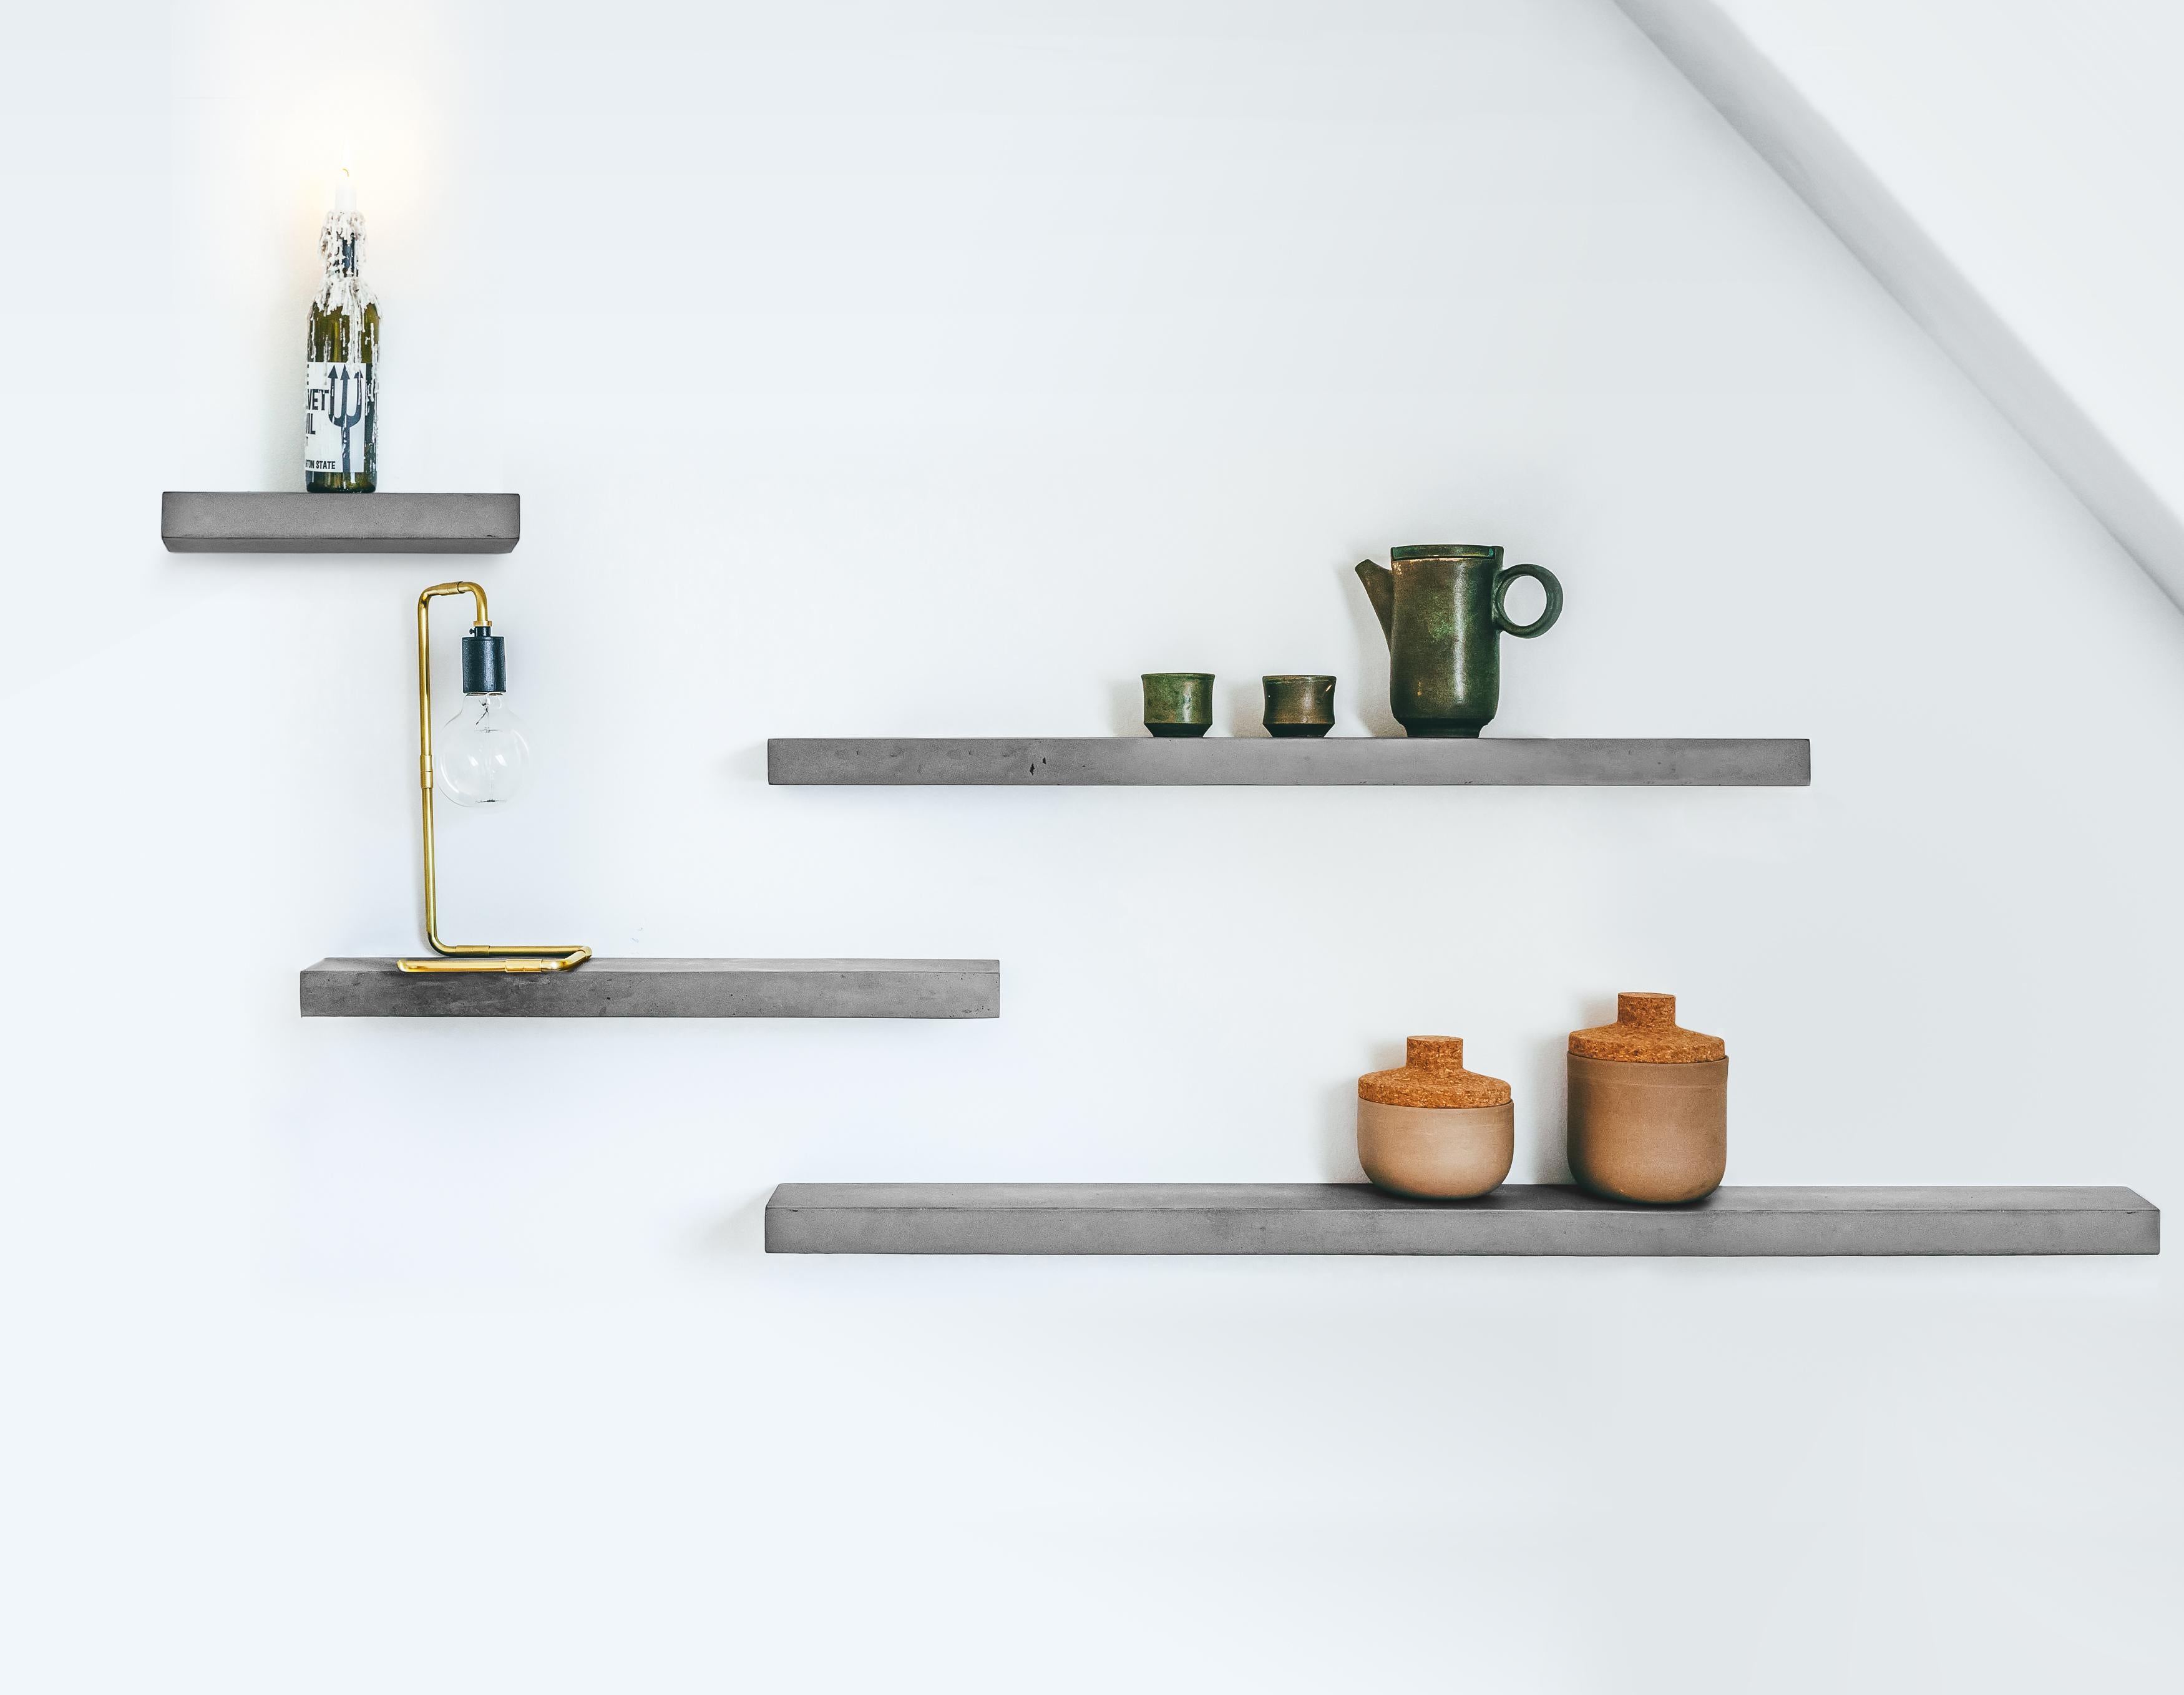 Its simple lines and the bold presence of raw concrete make this small ciment shelf great to highlight your objects and works of art in an elegant way without design faux pas.

Some will put their collection of centenarians bonsaïs or rare cactus.